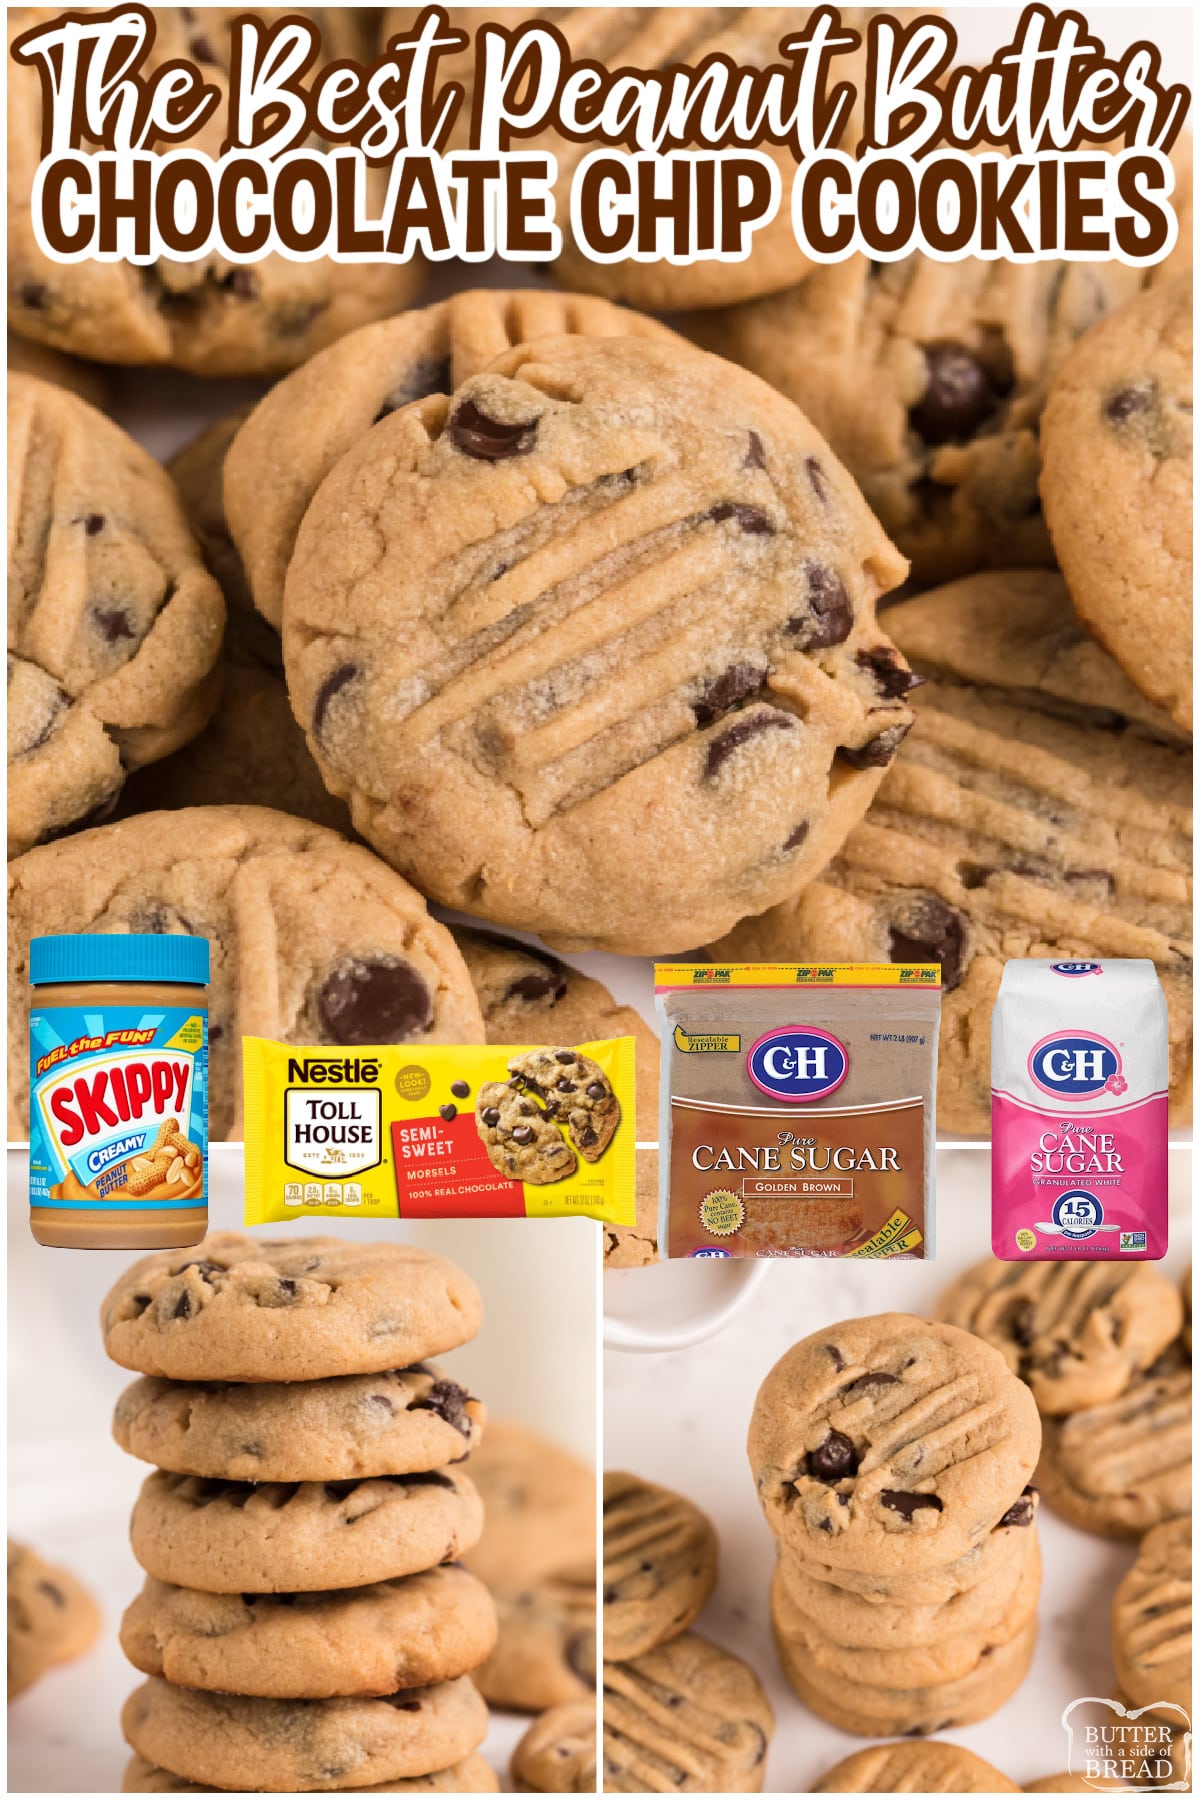 Peanut Butter Chocolate Chip Cookies are soft and chewy, and they turn out perfect every time! Add chocolate chips to this classic peanut butter cookie recipe to take these cookies to the next level!